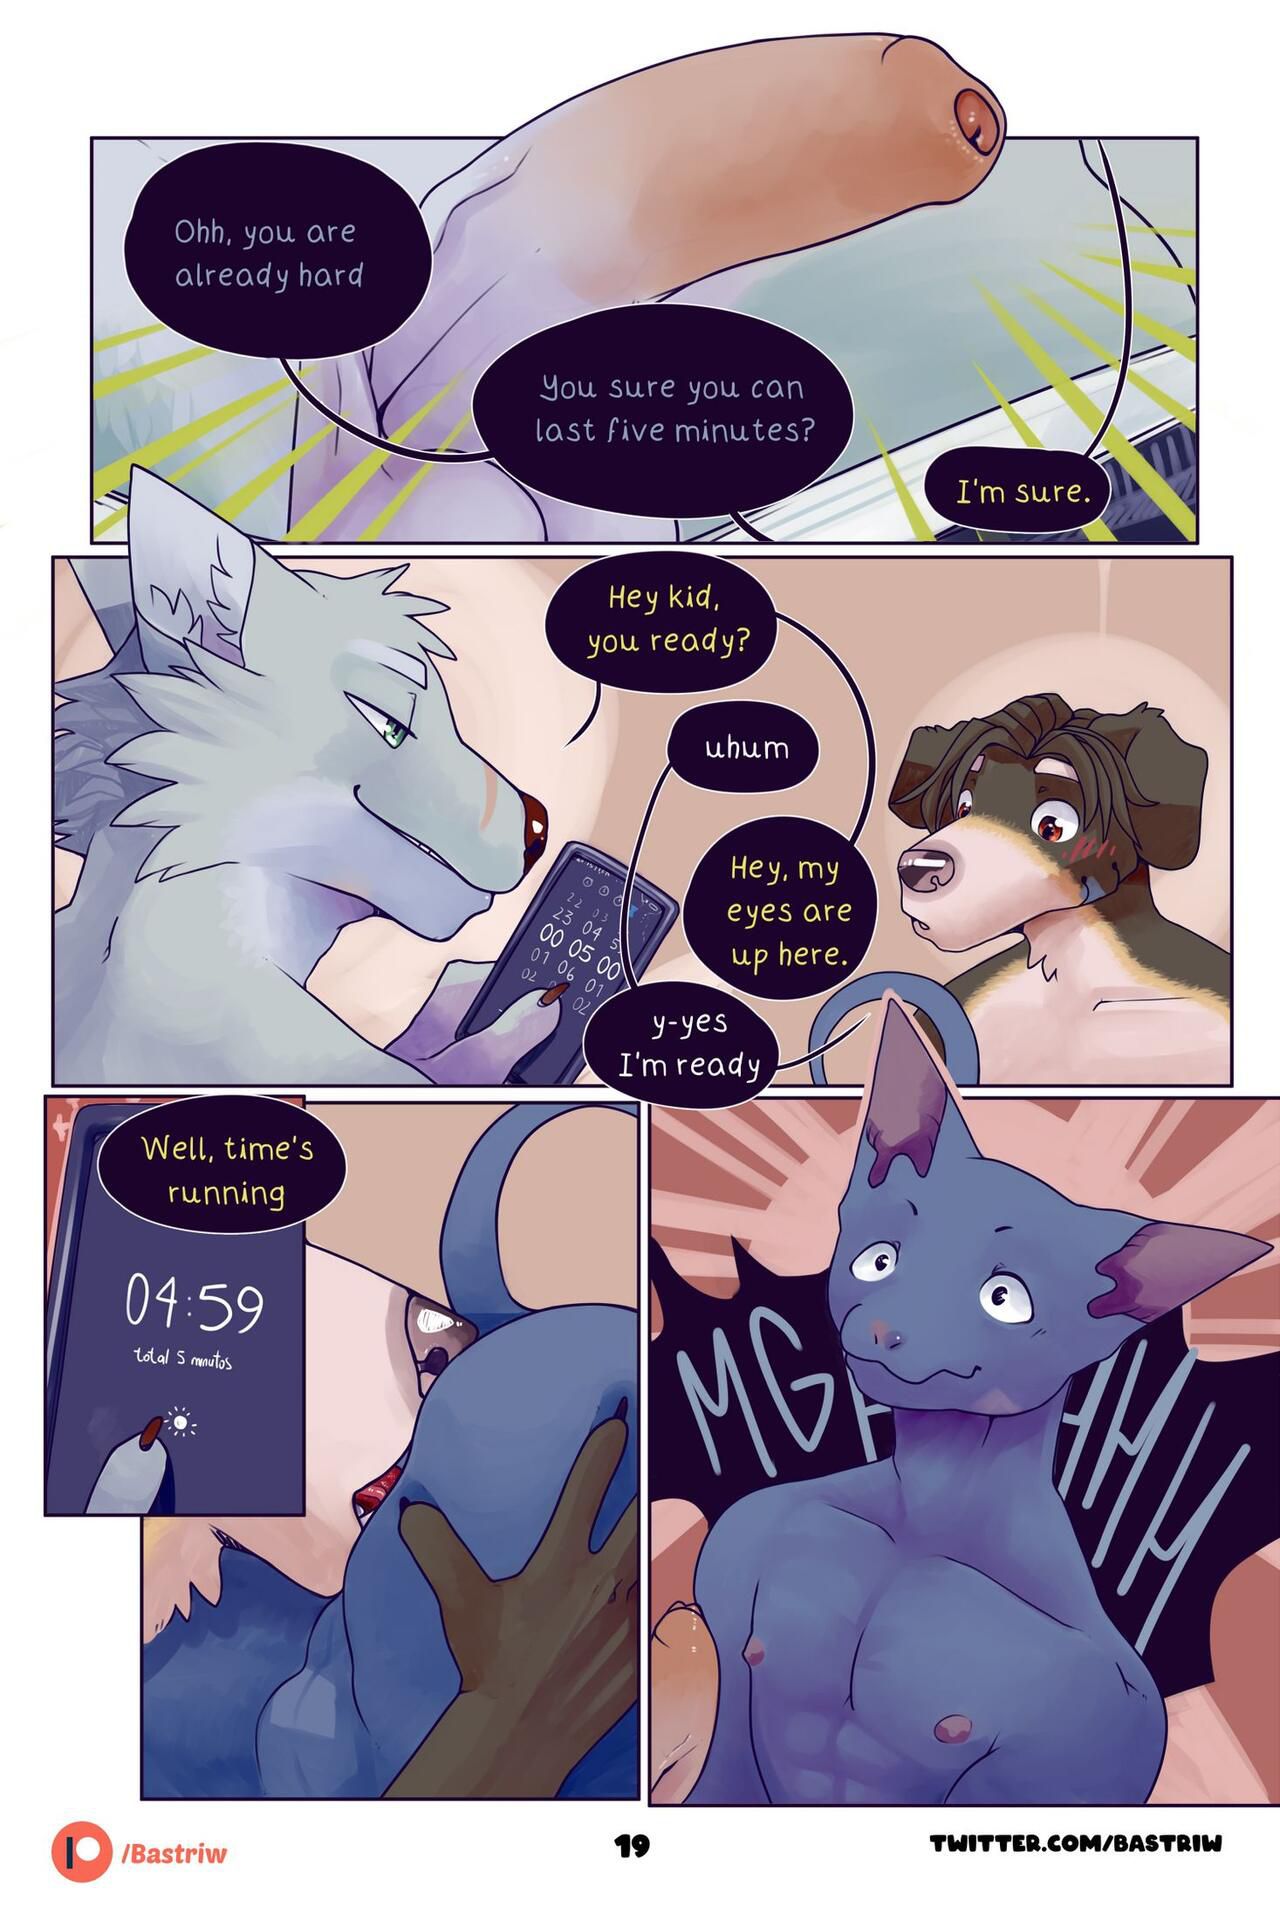 [Bastriw] Pretty - Chapter 3 (ongoing) 19